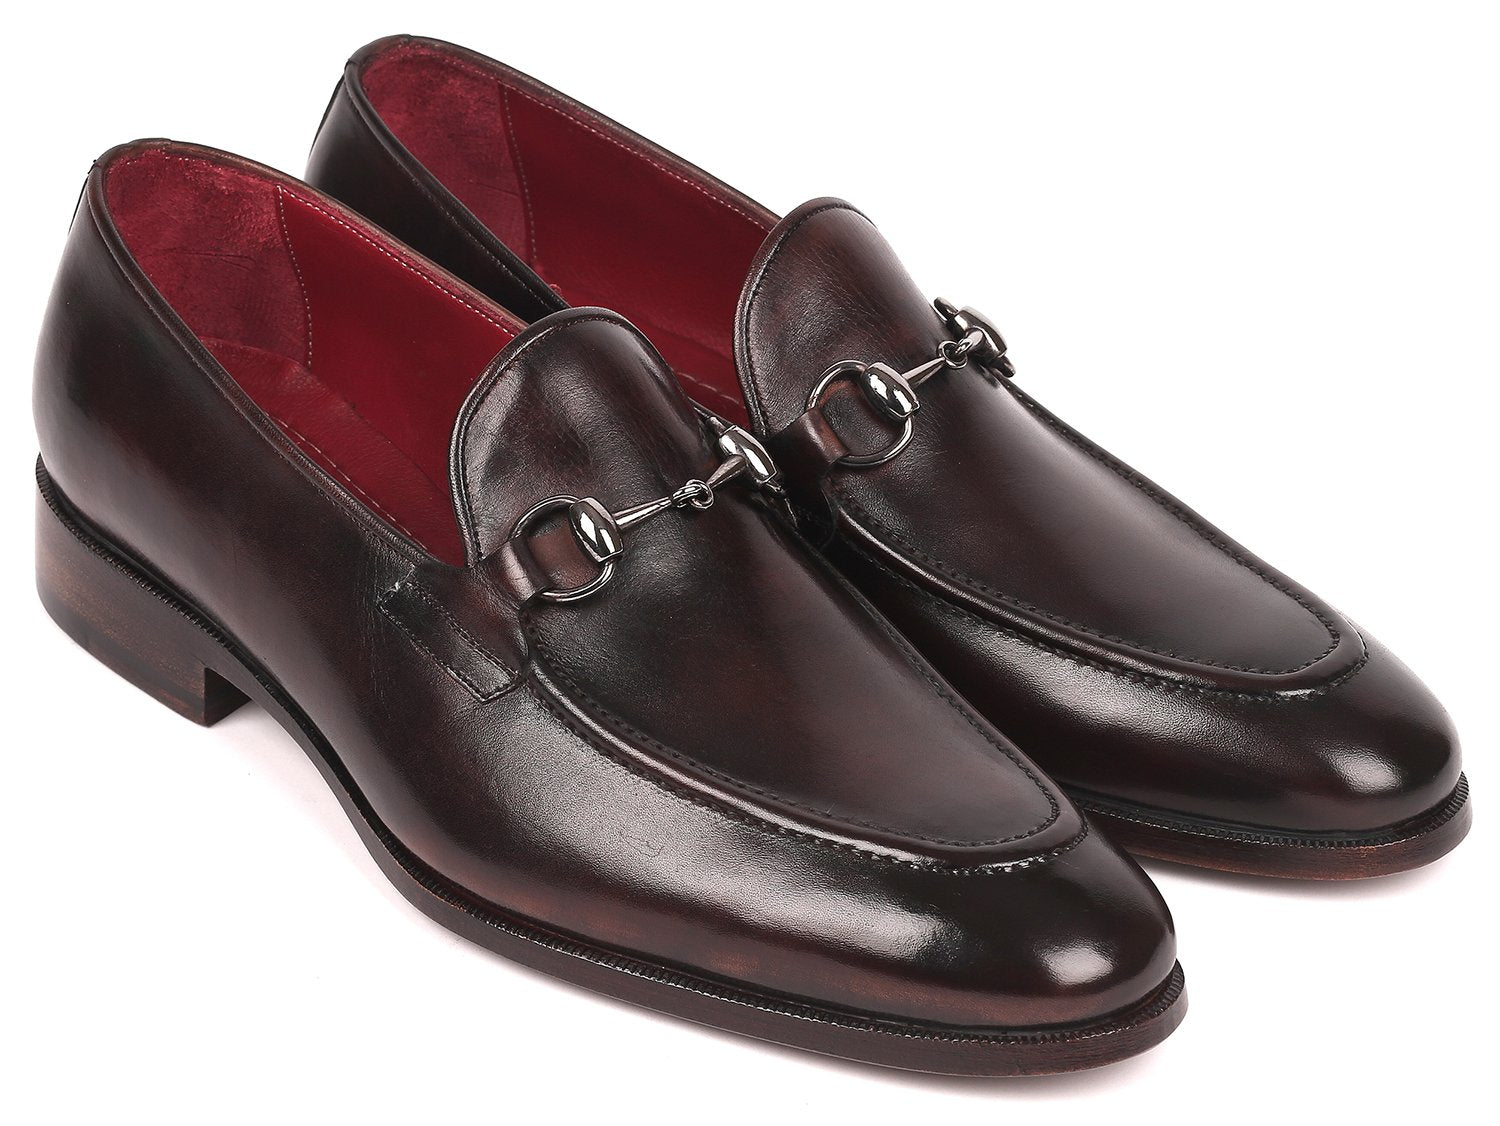 Discover Handcrafted Paul Parkman Loafers for Men in California